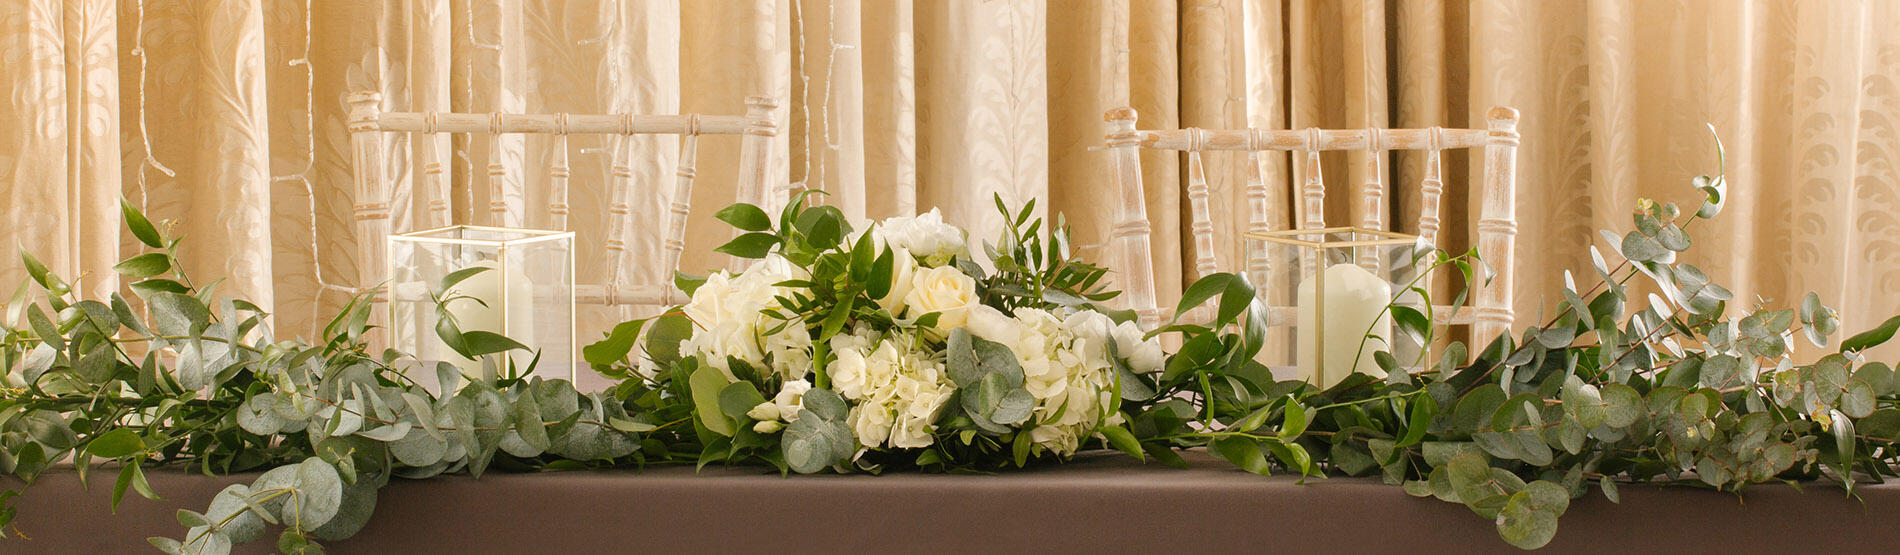 Wedding table decorated with flowers and candles